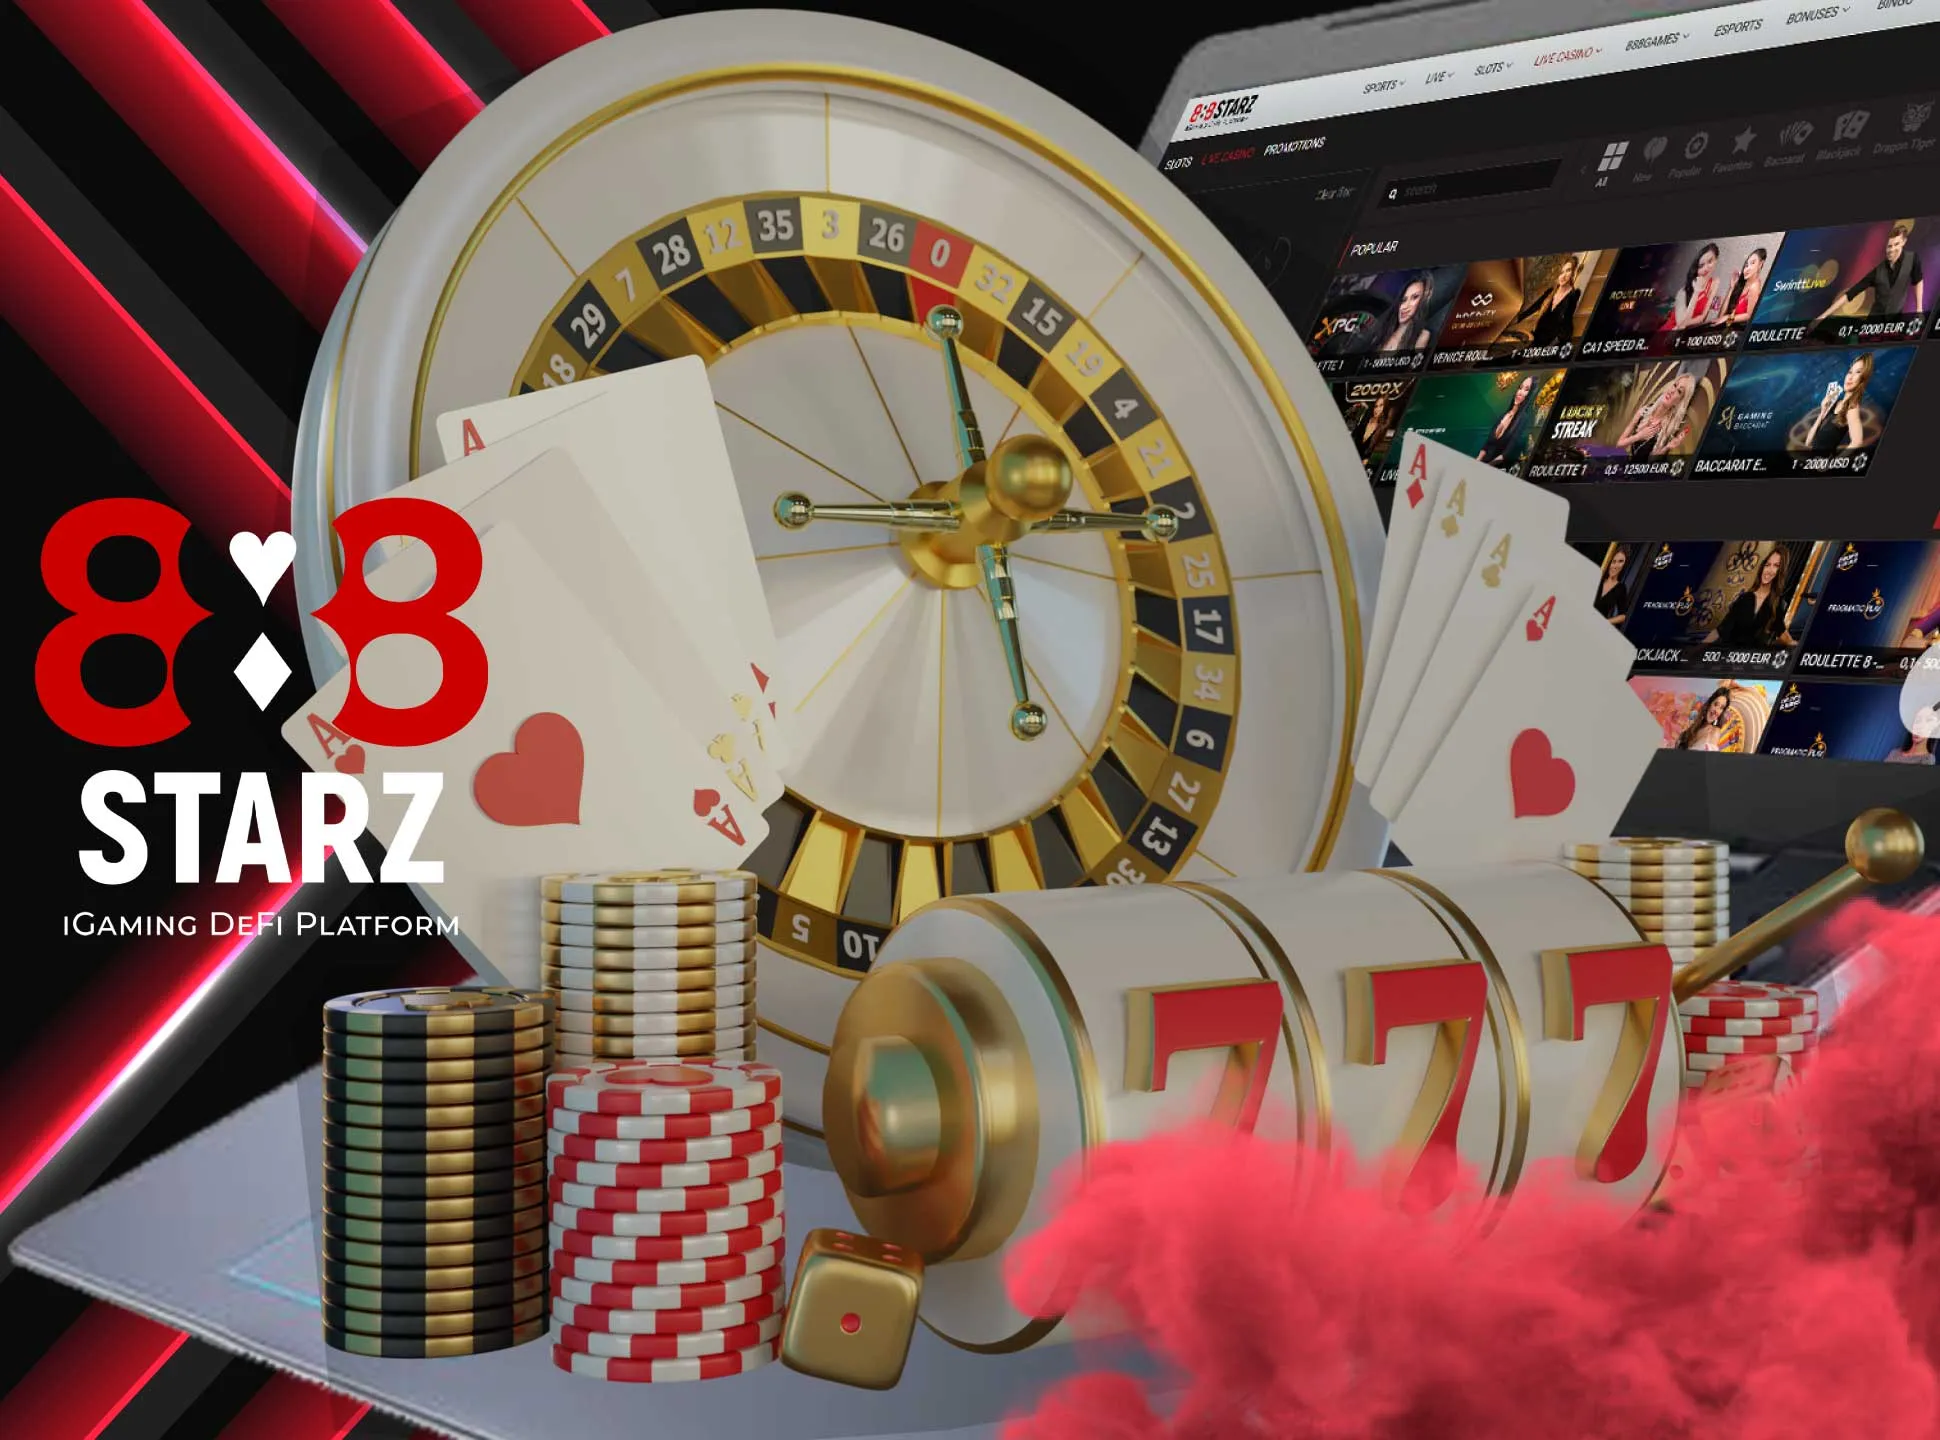 You can also play different casino games on 888starz.